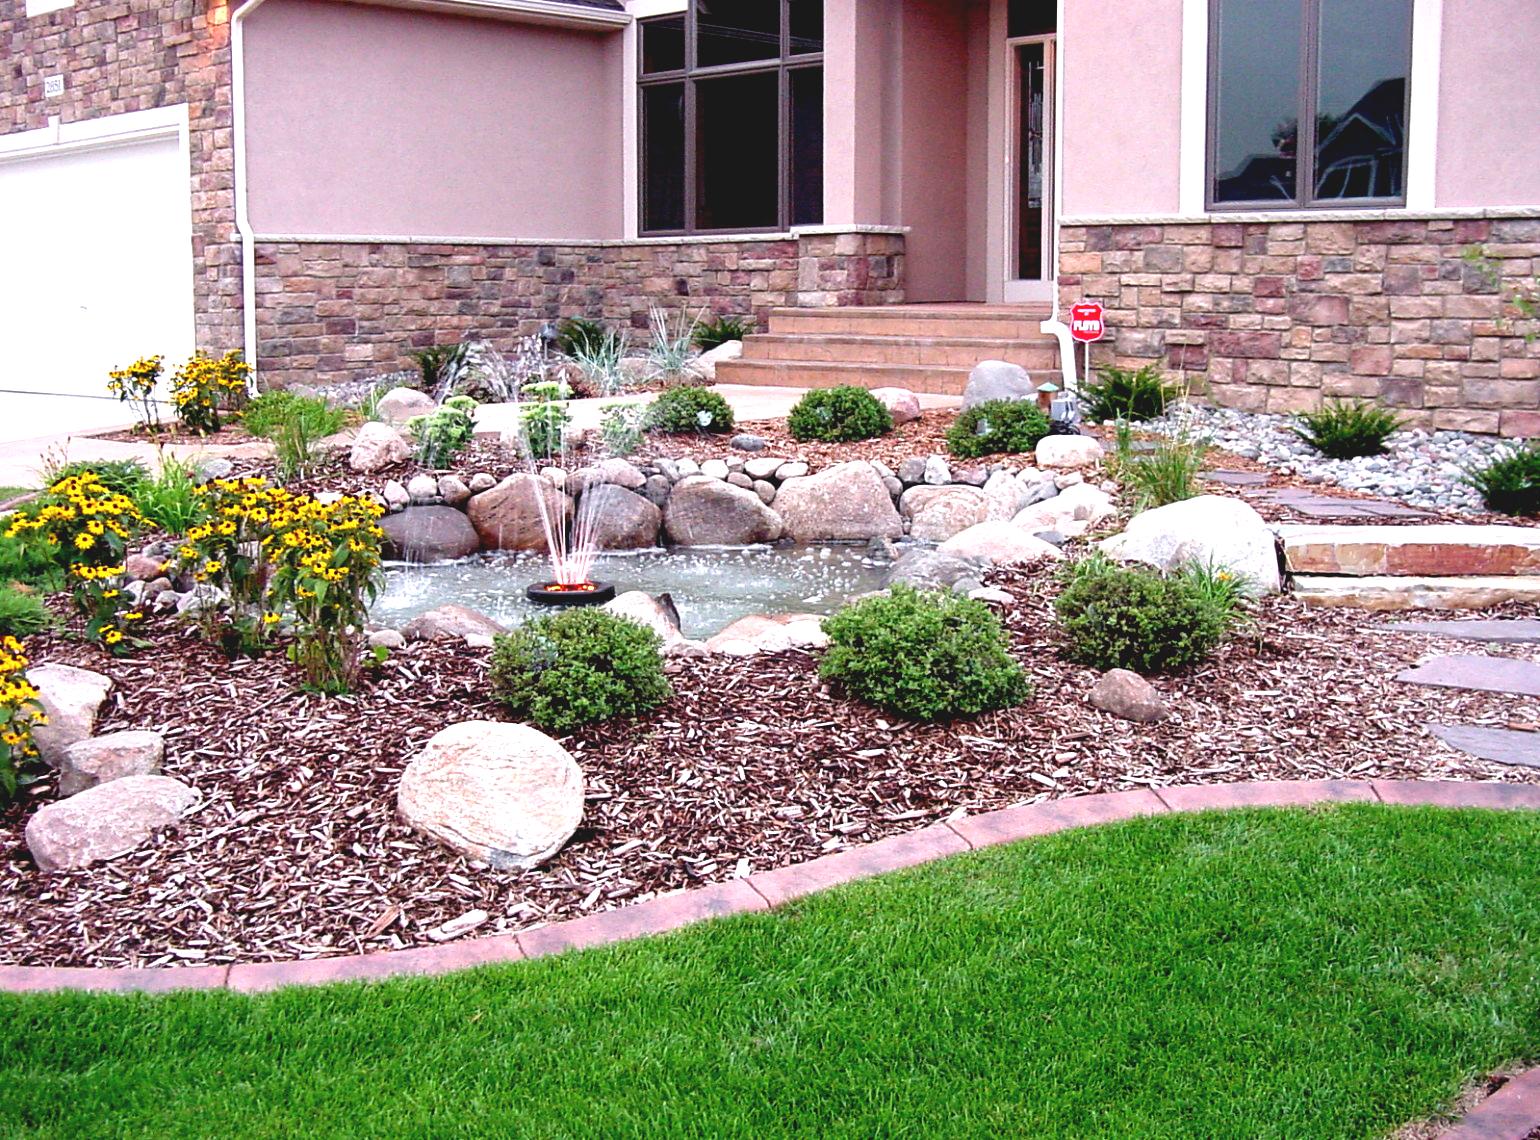 A house with a rock garden designed using tools for gardening.